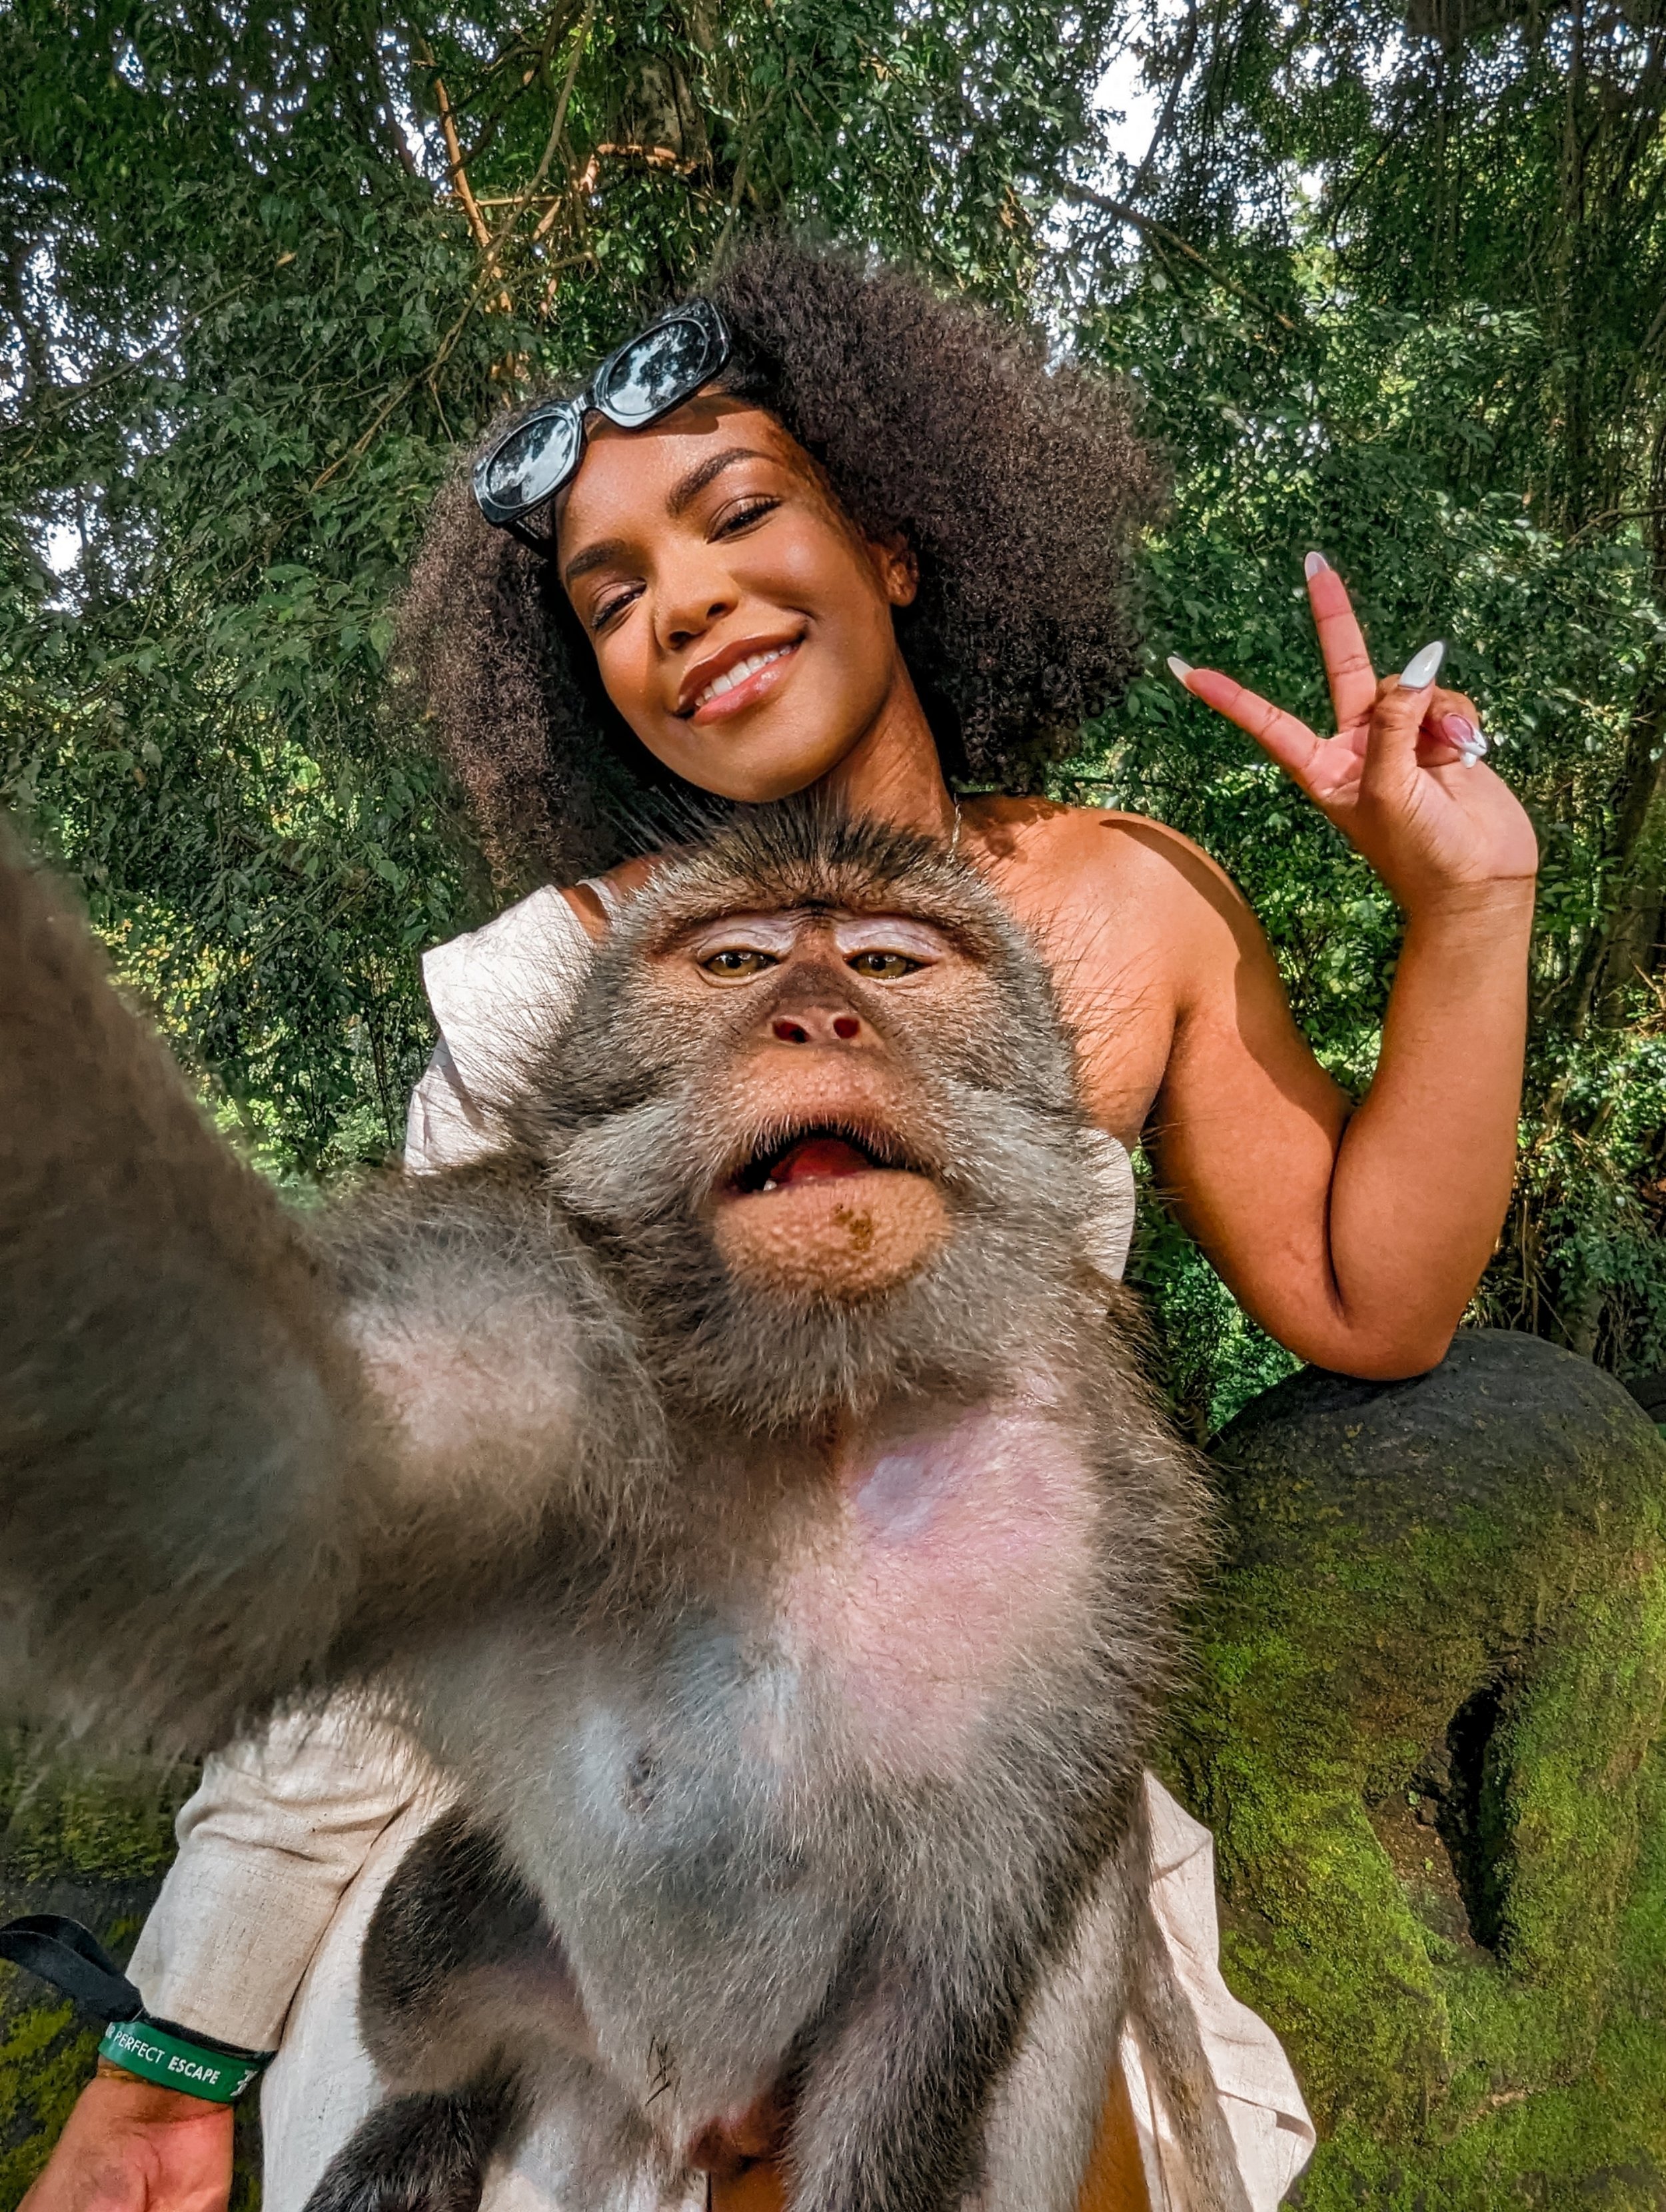 Black solo female traveler with greether in Bali, Indonesia